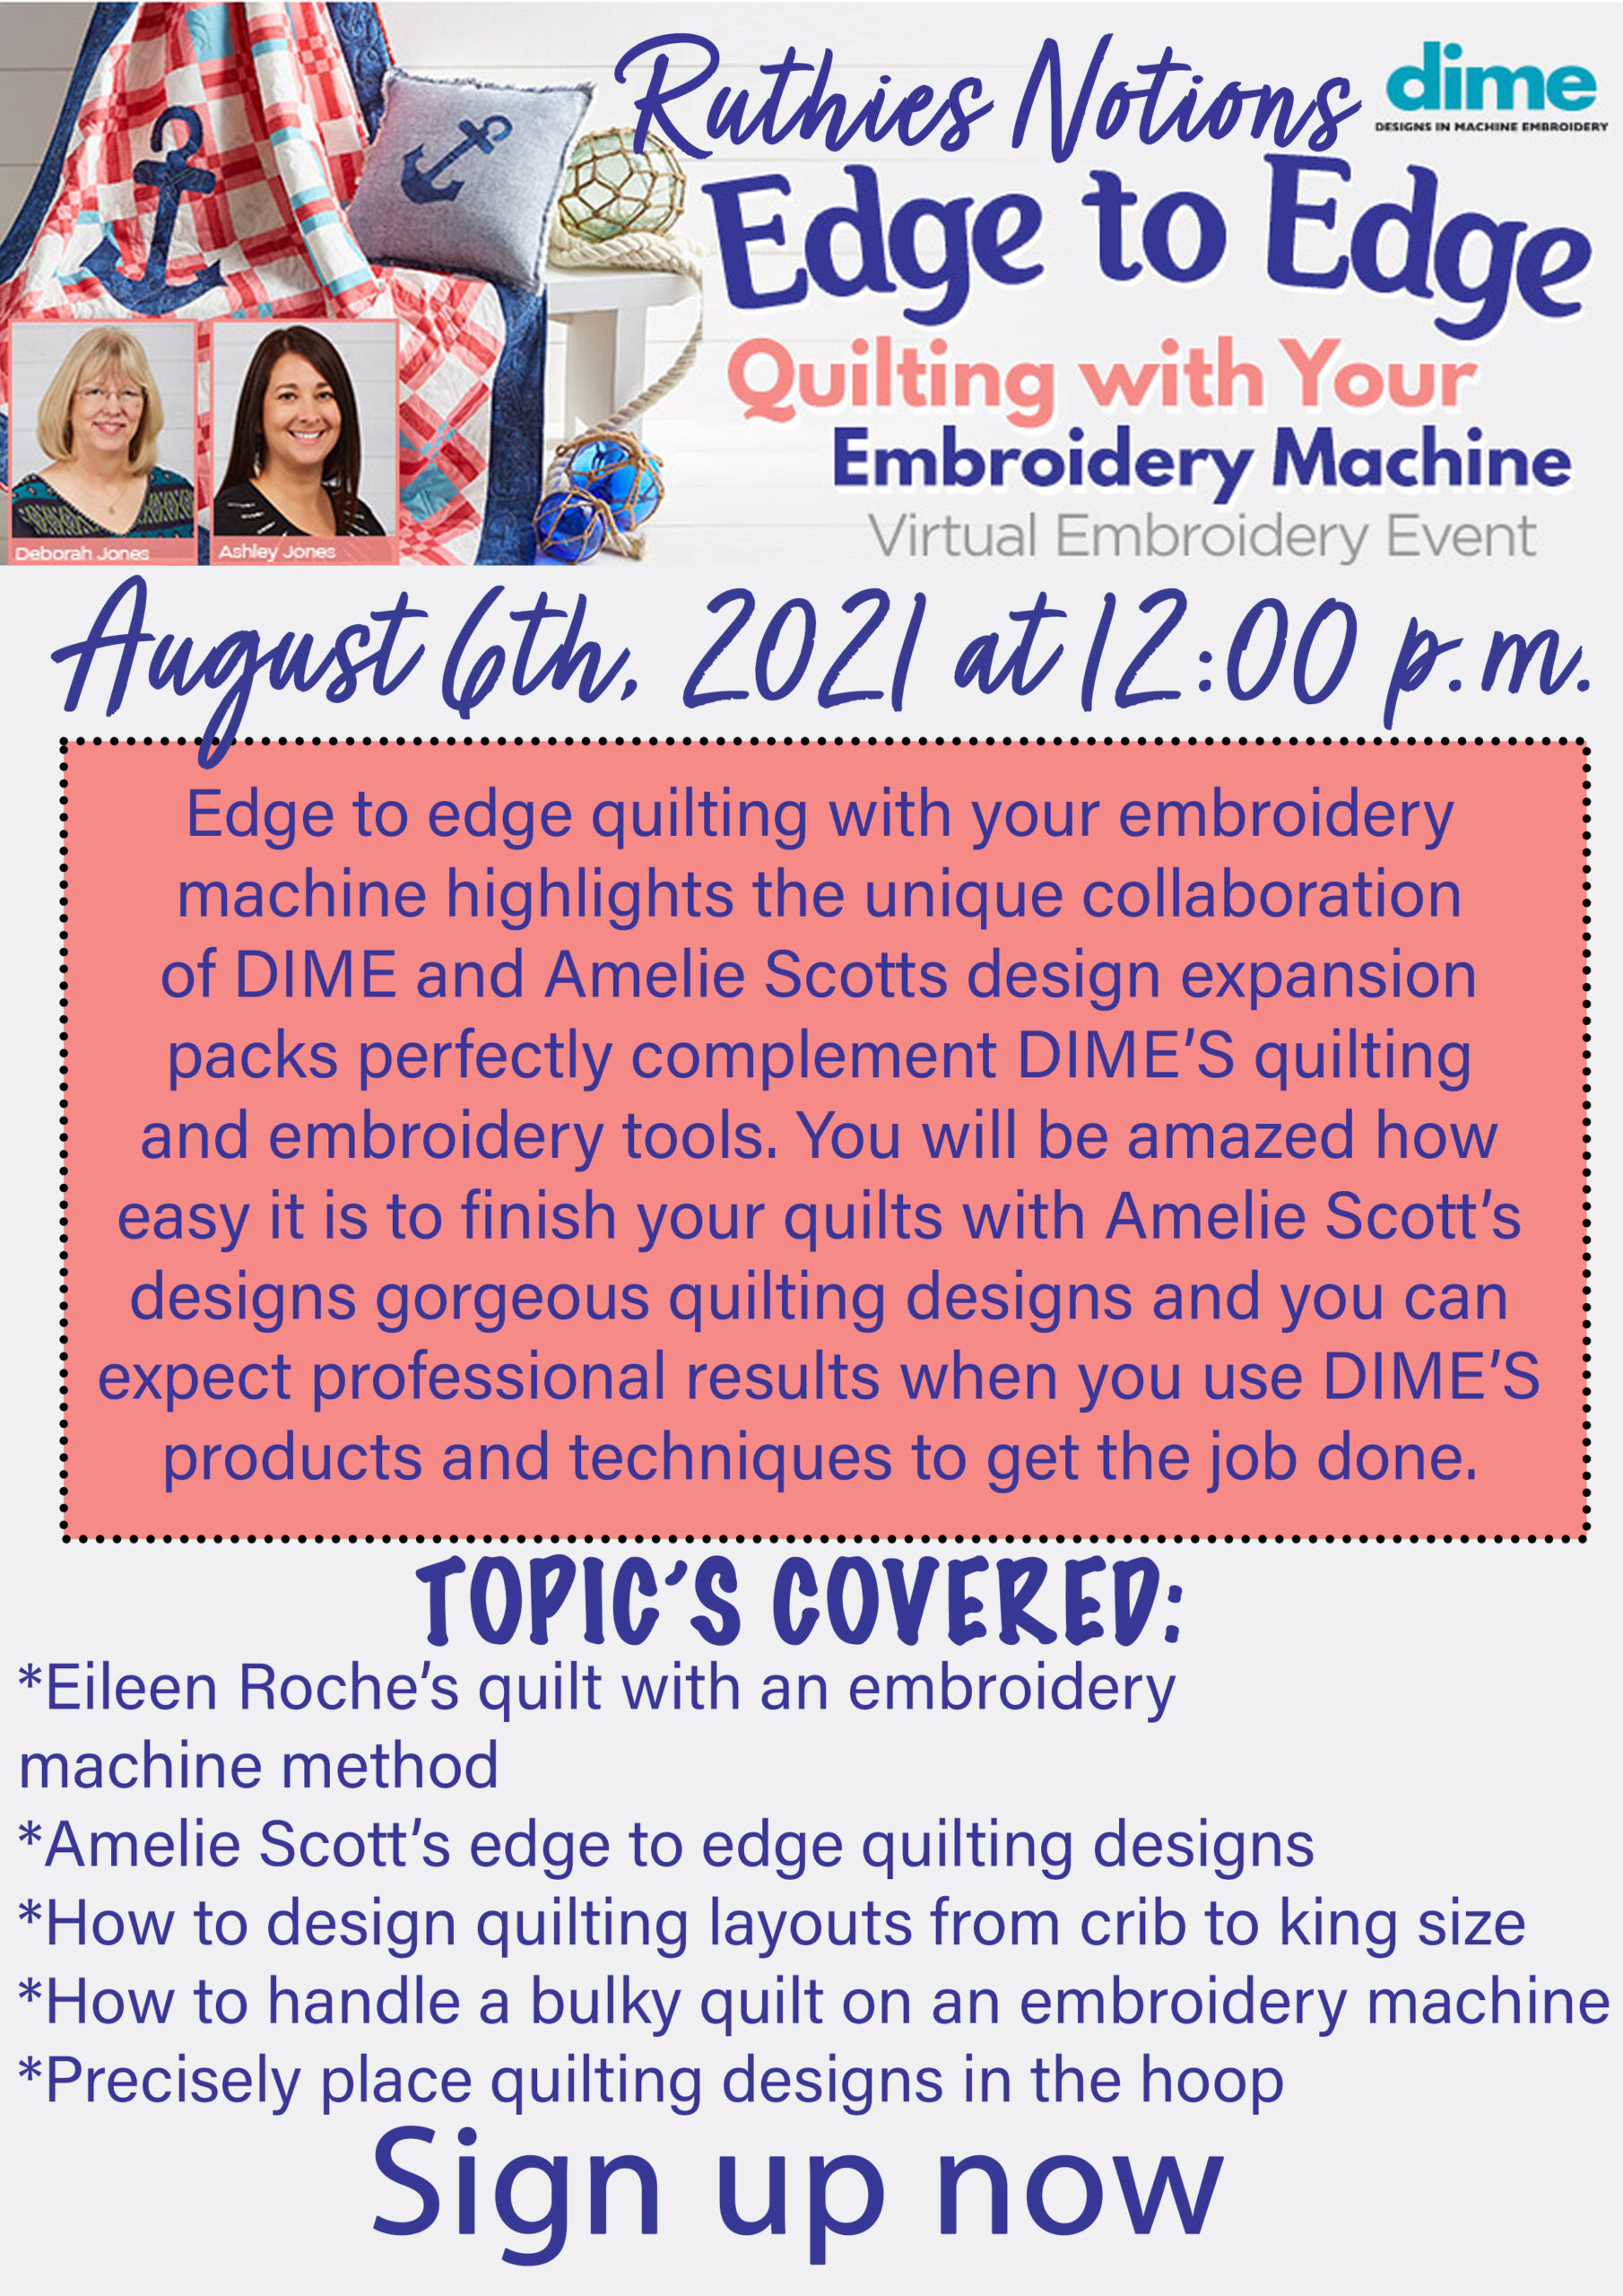 Edge to edge quilting august 6th